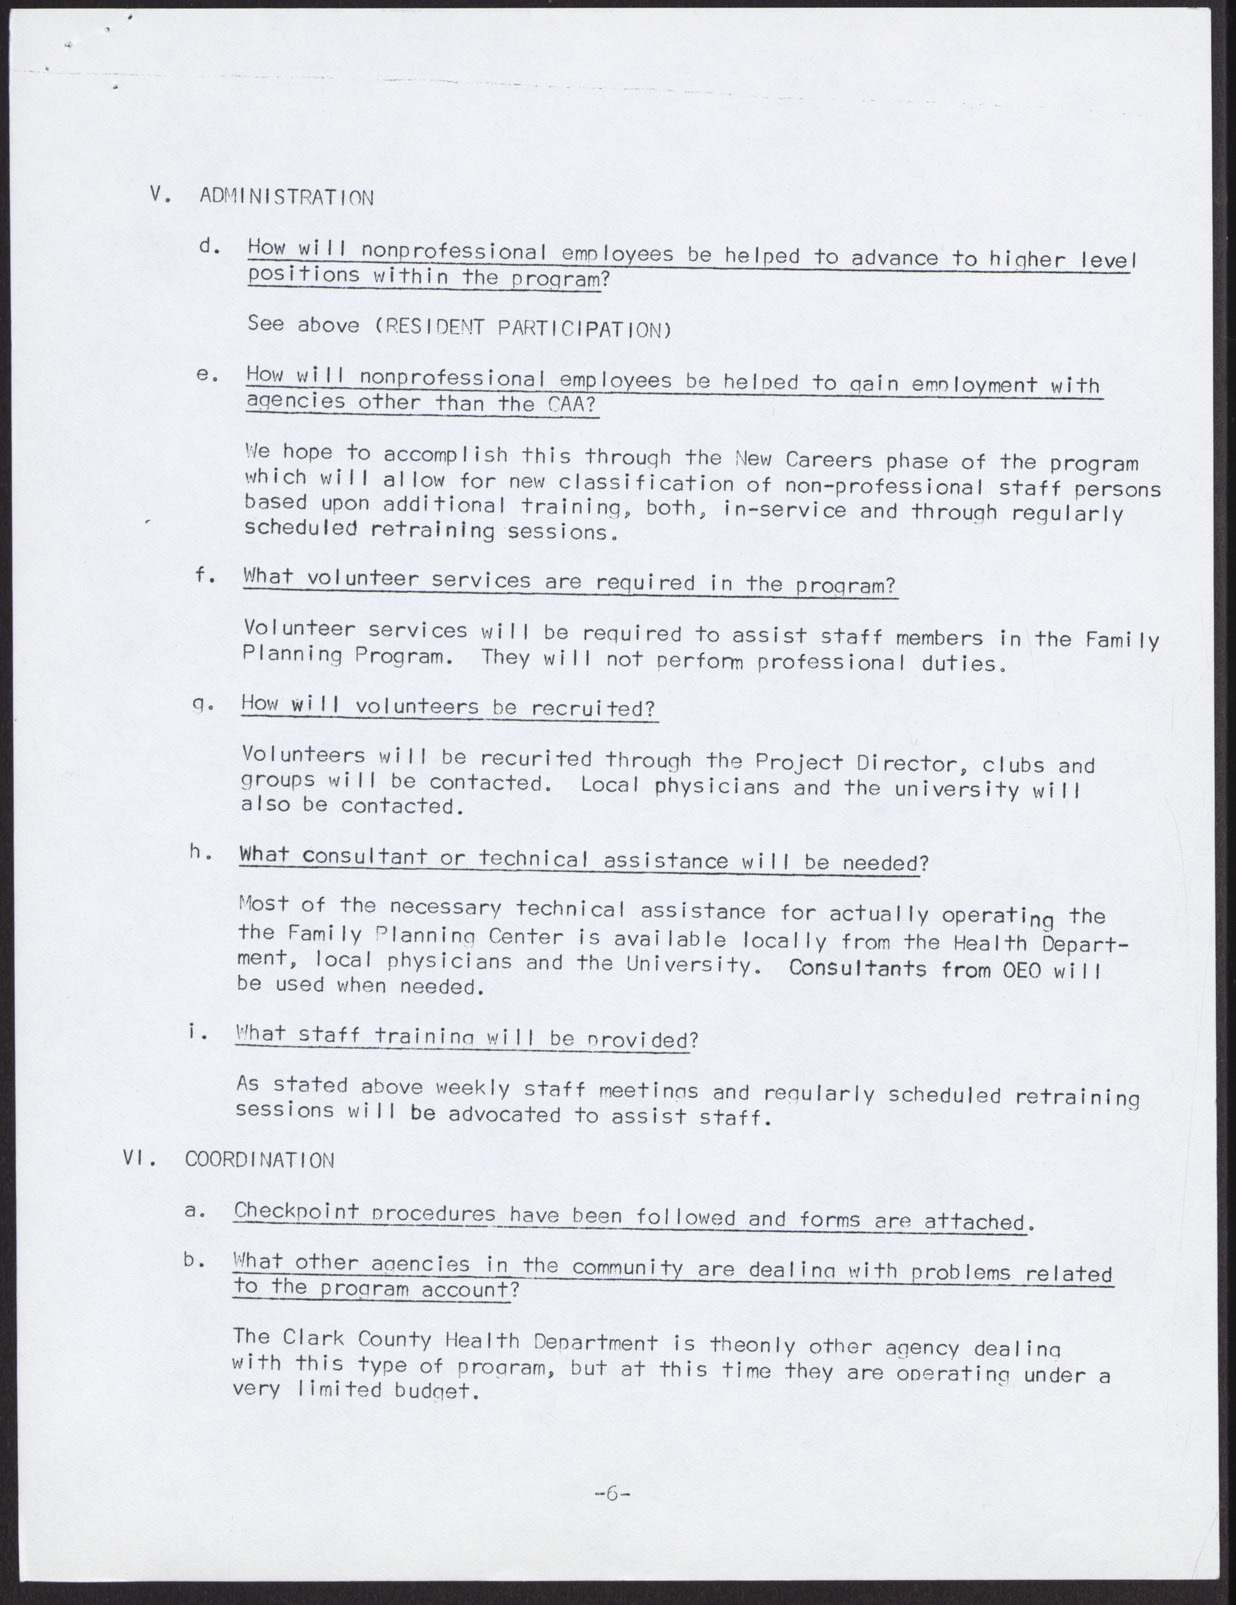 United Fund of Clark County, Inc. Manual of Operations (8 pages, possibly out of sequence or unrelated), no date, page 7